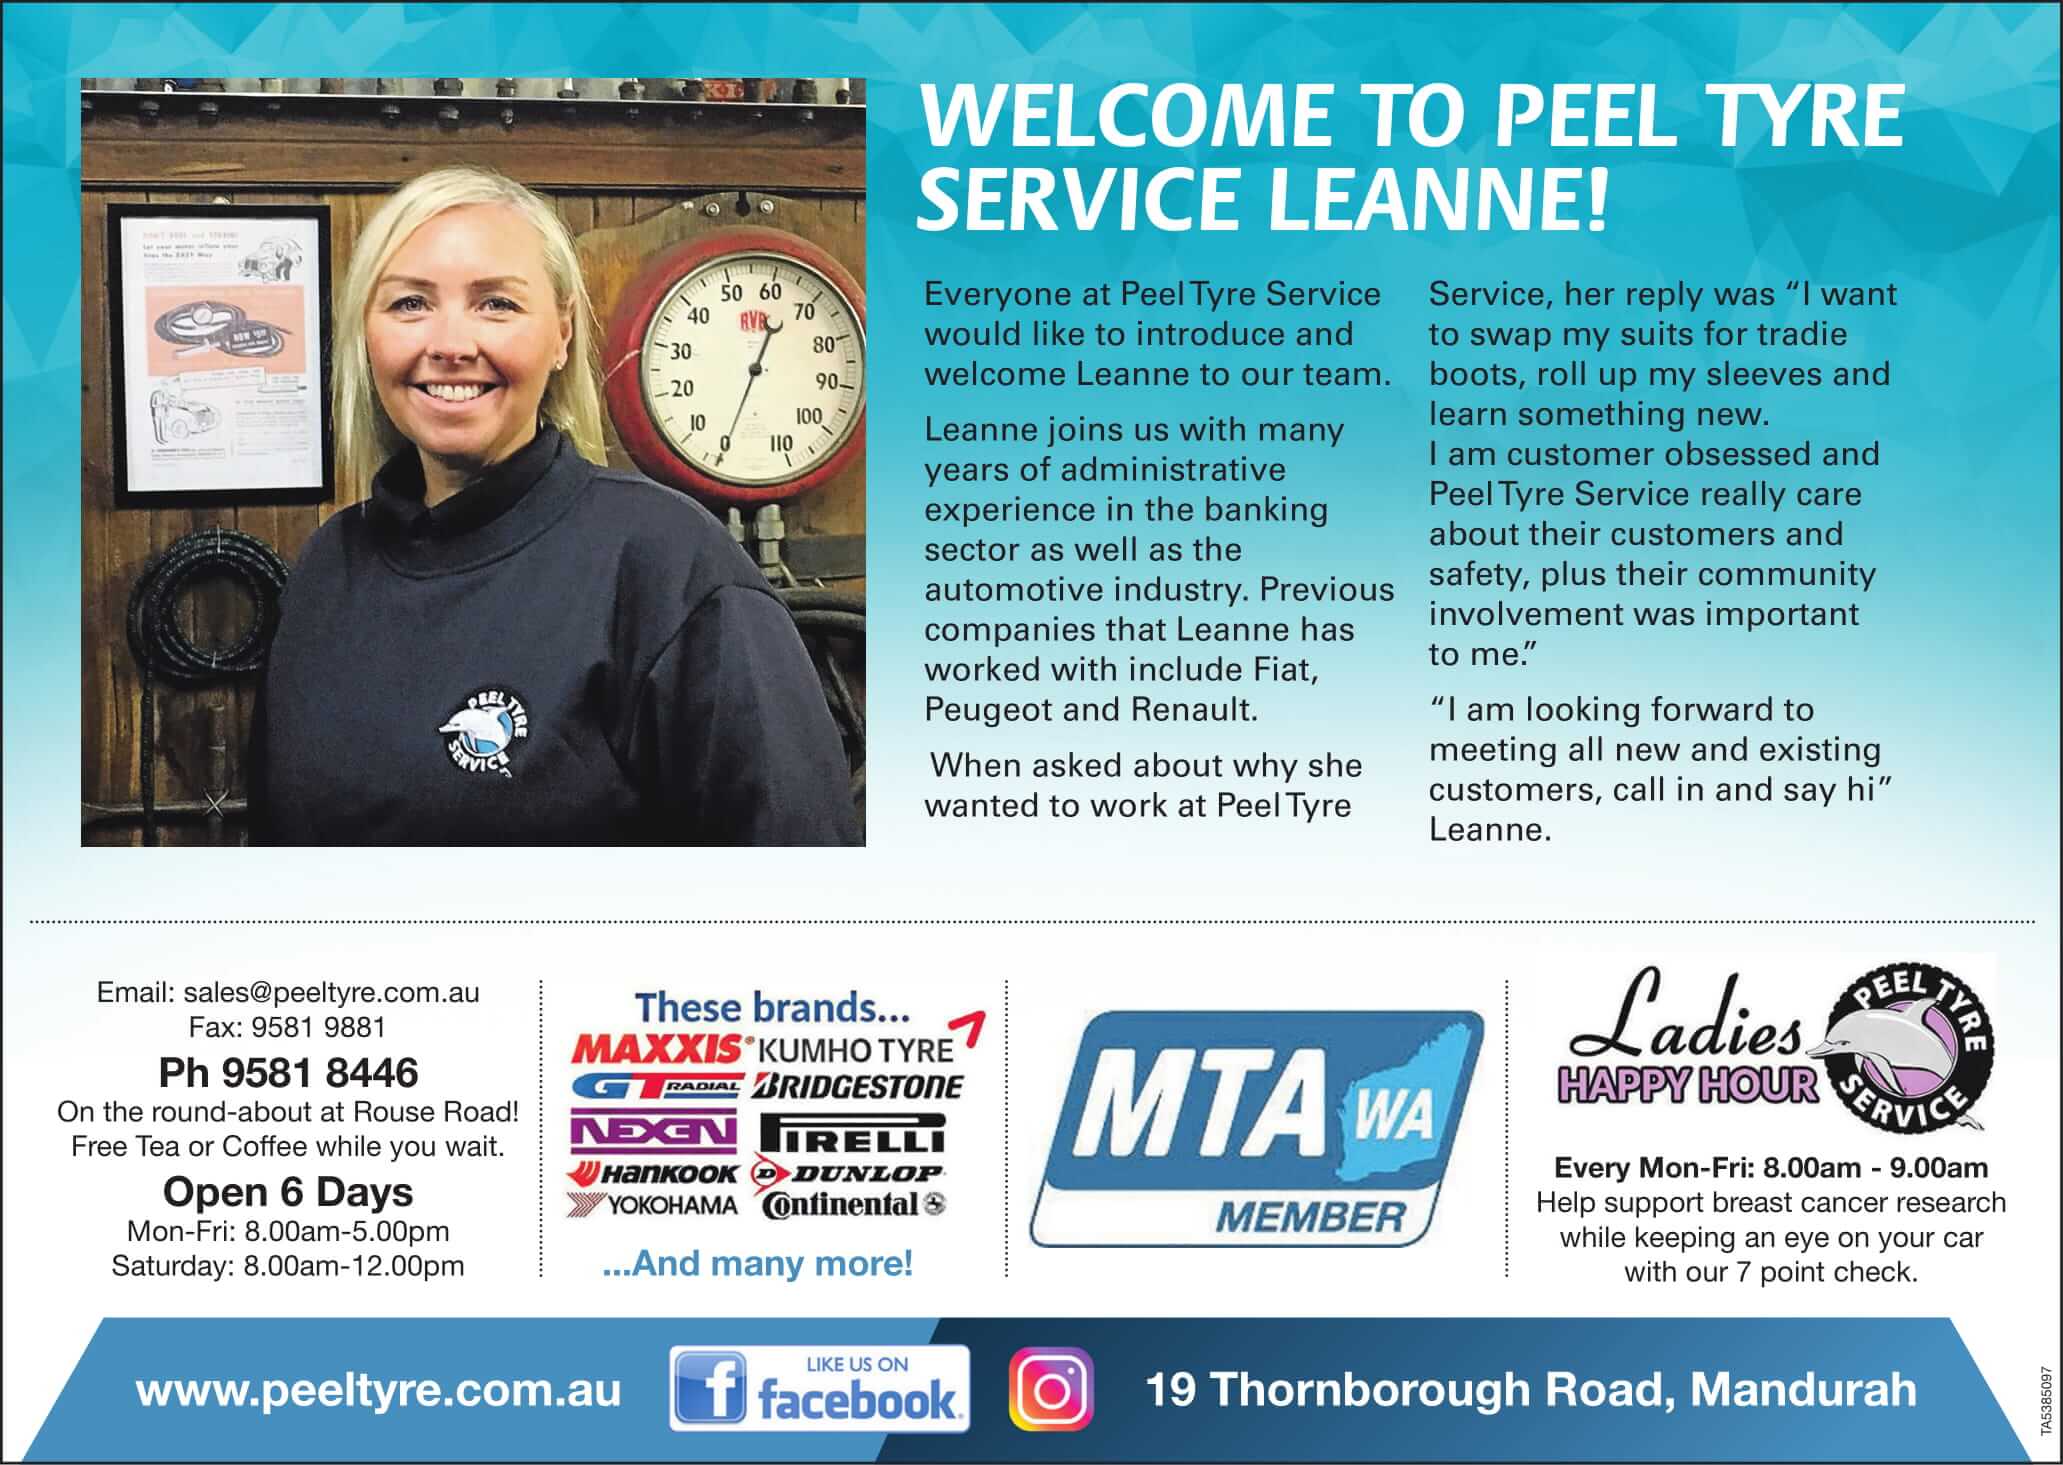 Welcome to Peel Tyre Service, Leanne!